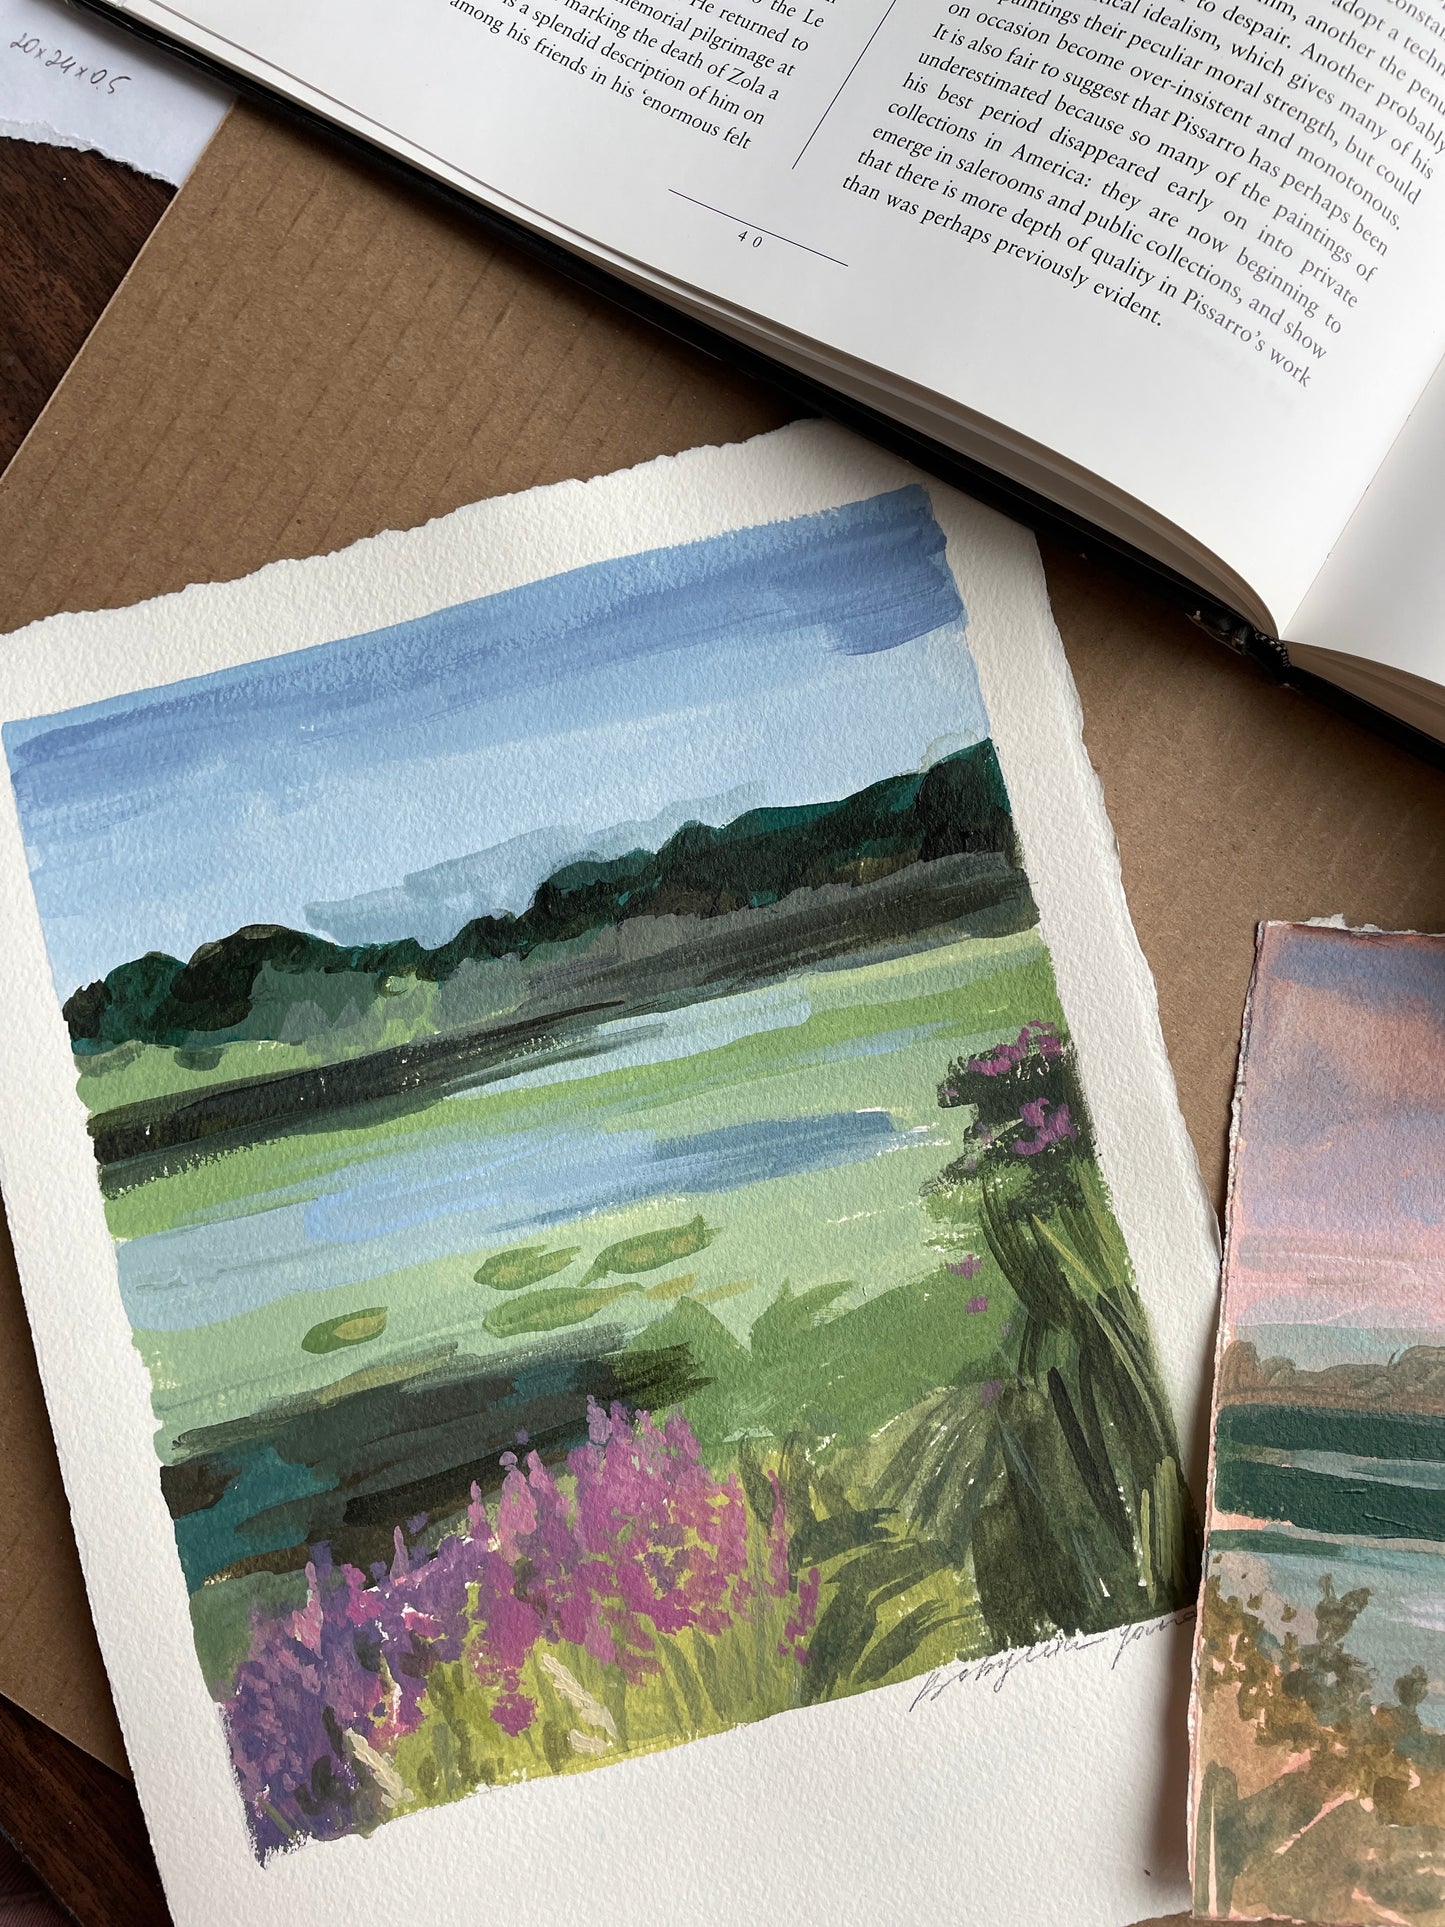 Lake landscape. Painting on paper.